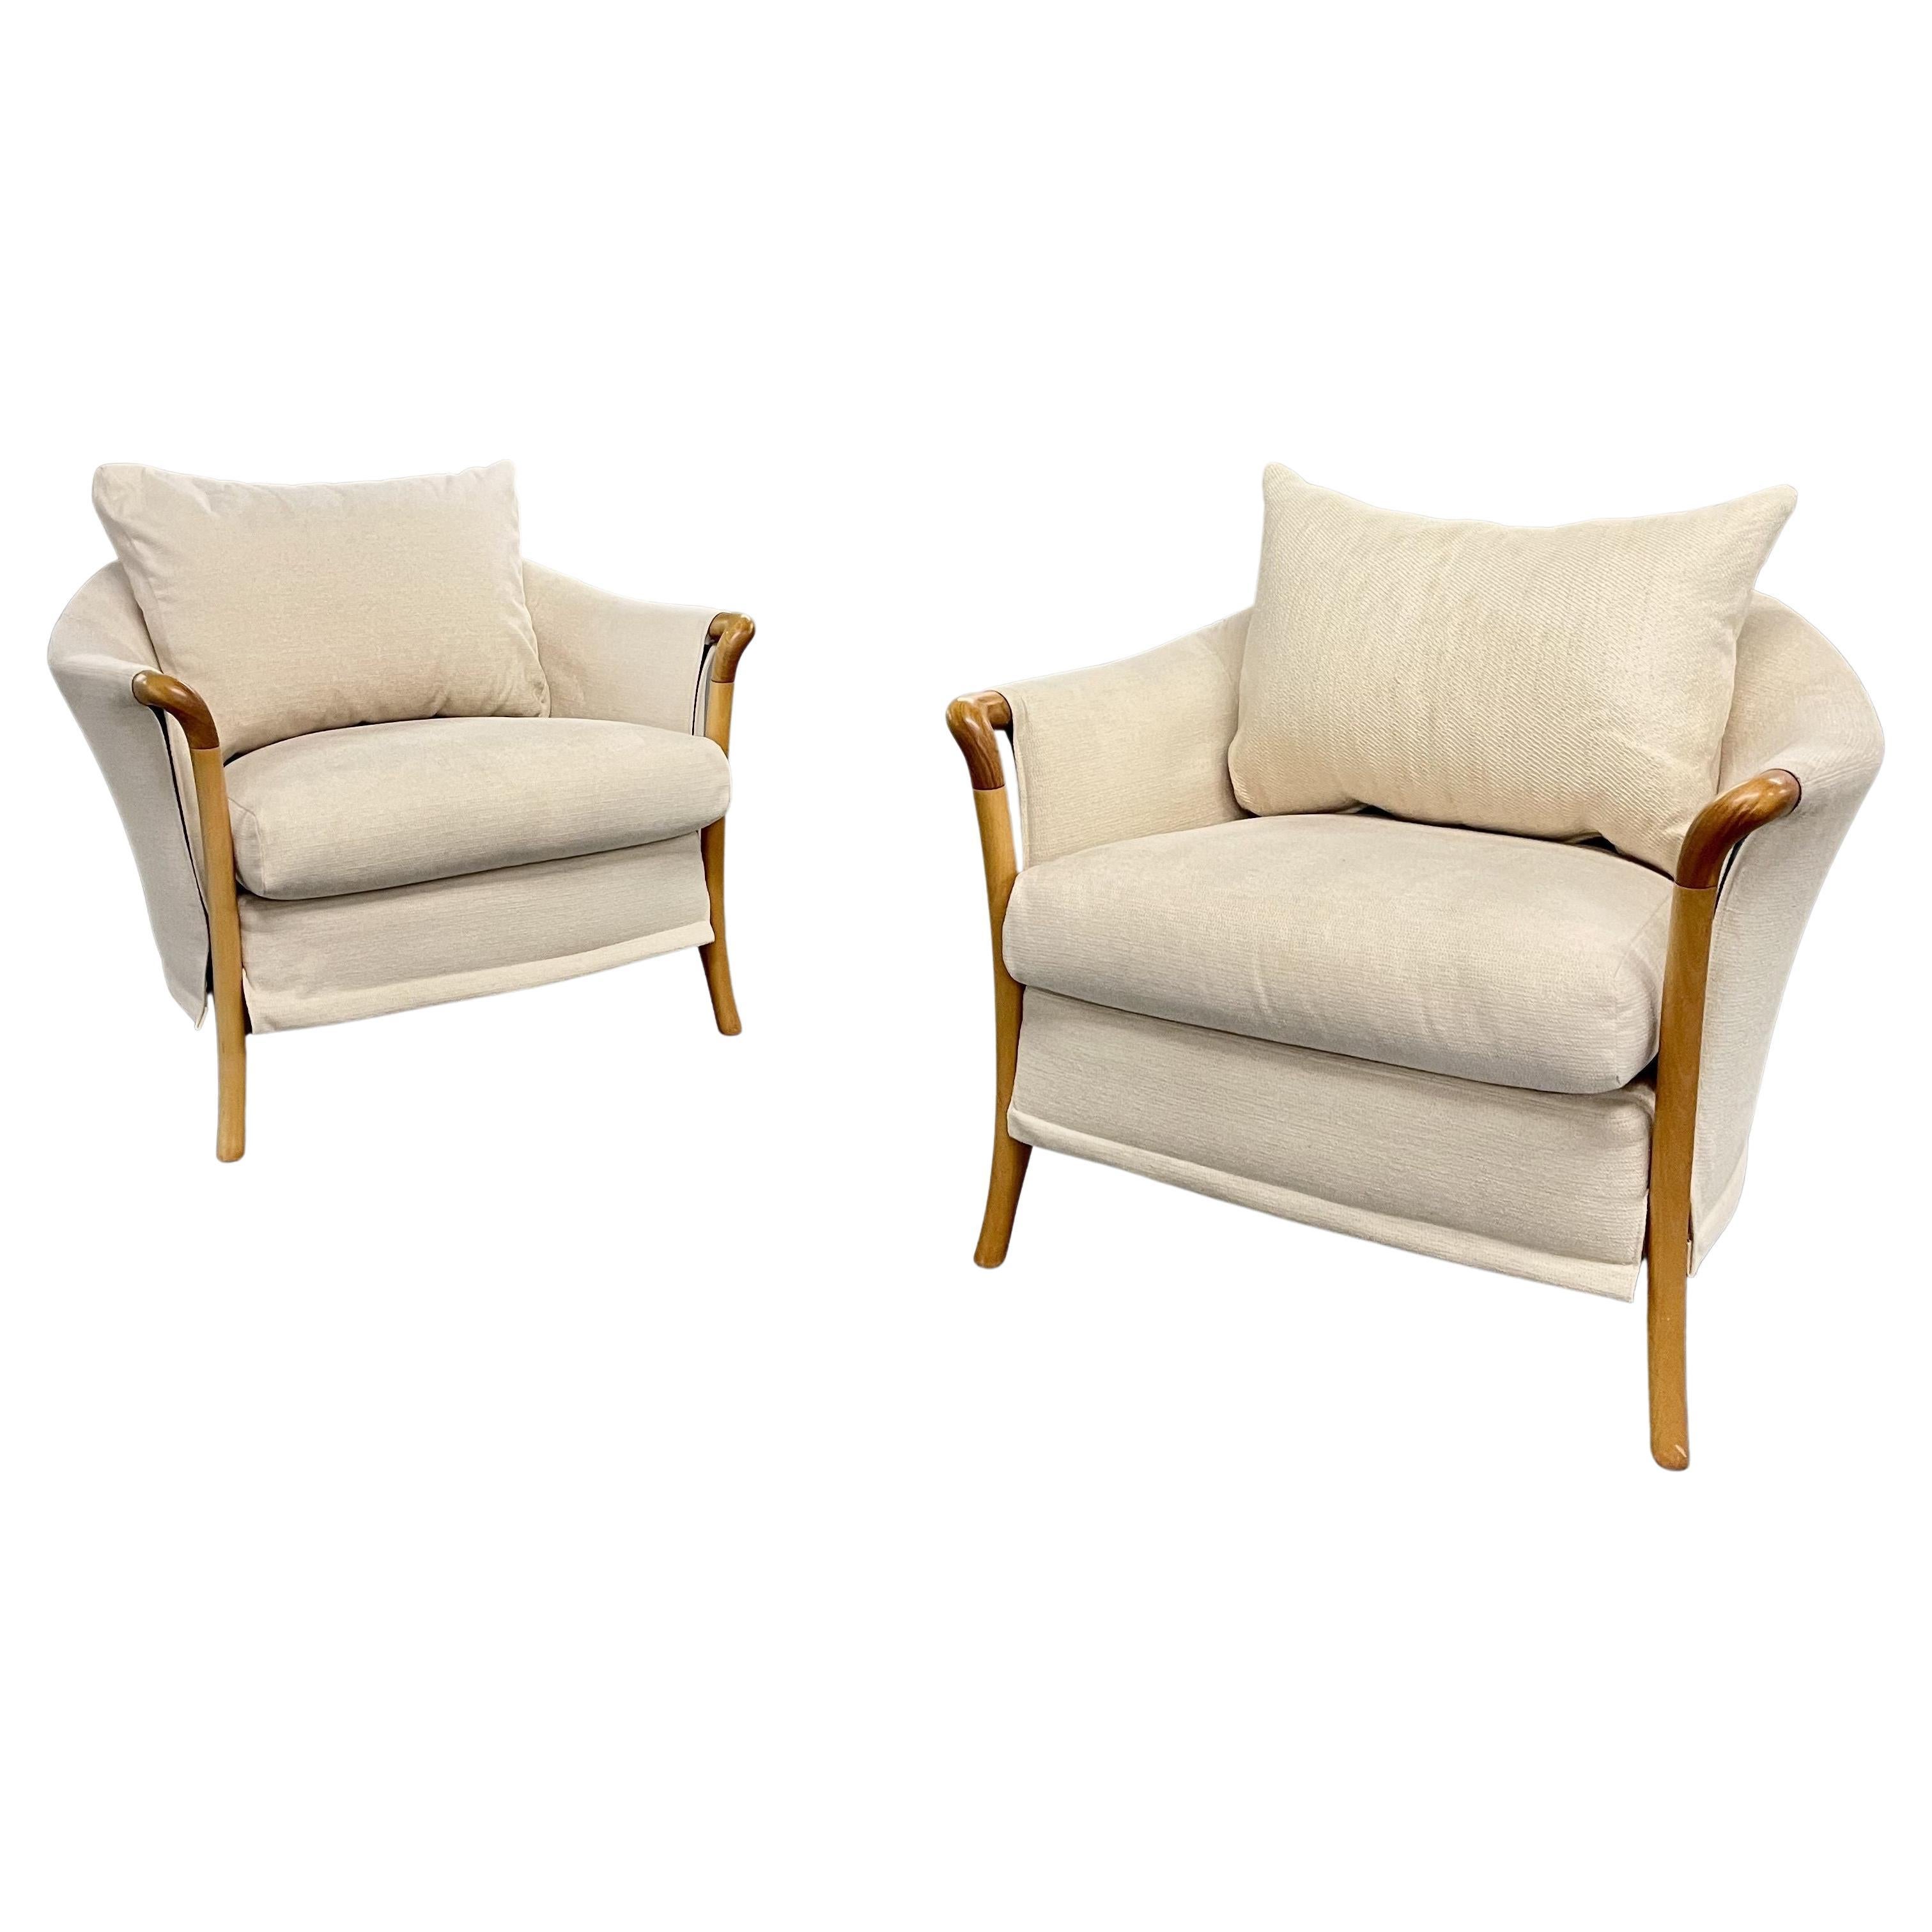 Pair of Umberto Asnago for Giorgetti Lounge Chairs, Arm Chairs, Bergeres, Italy